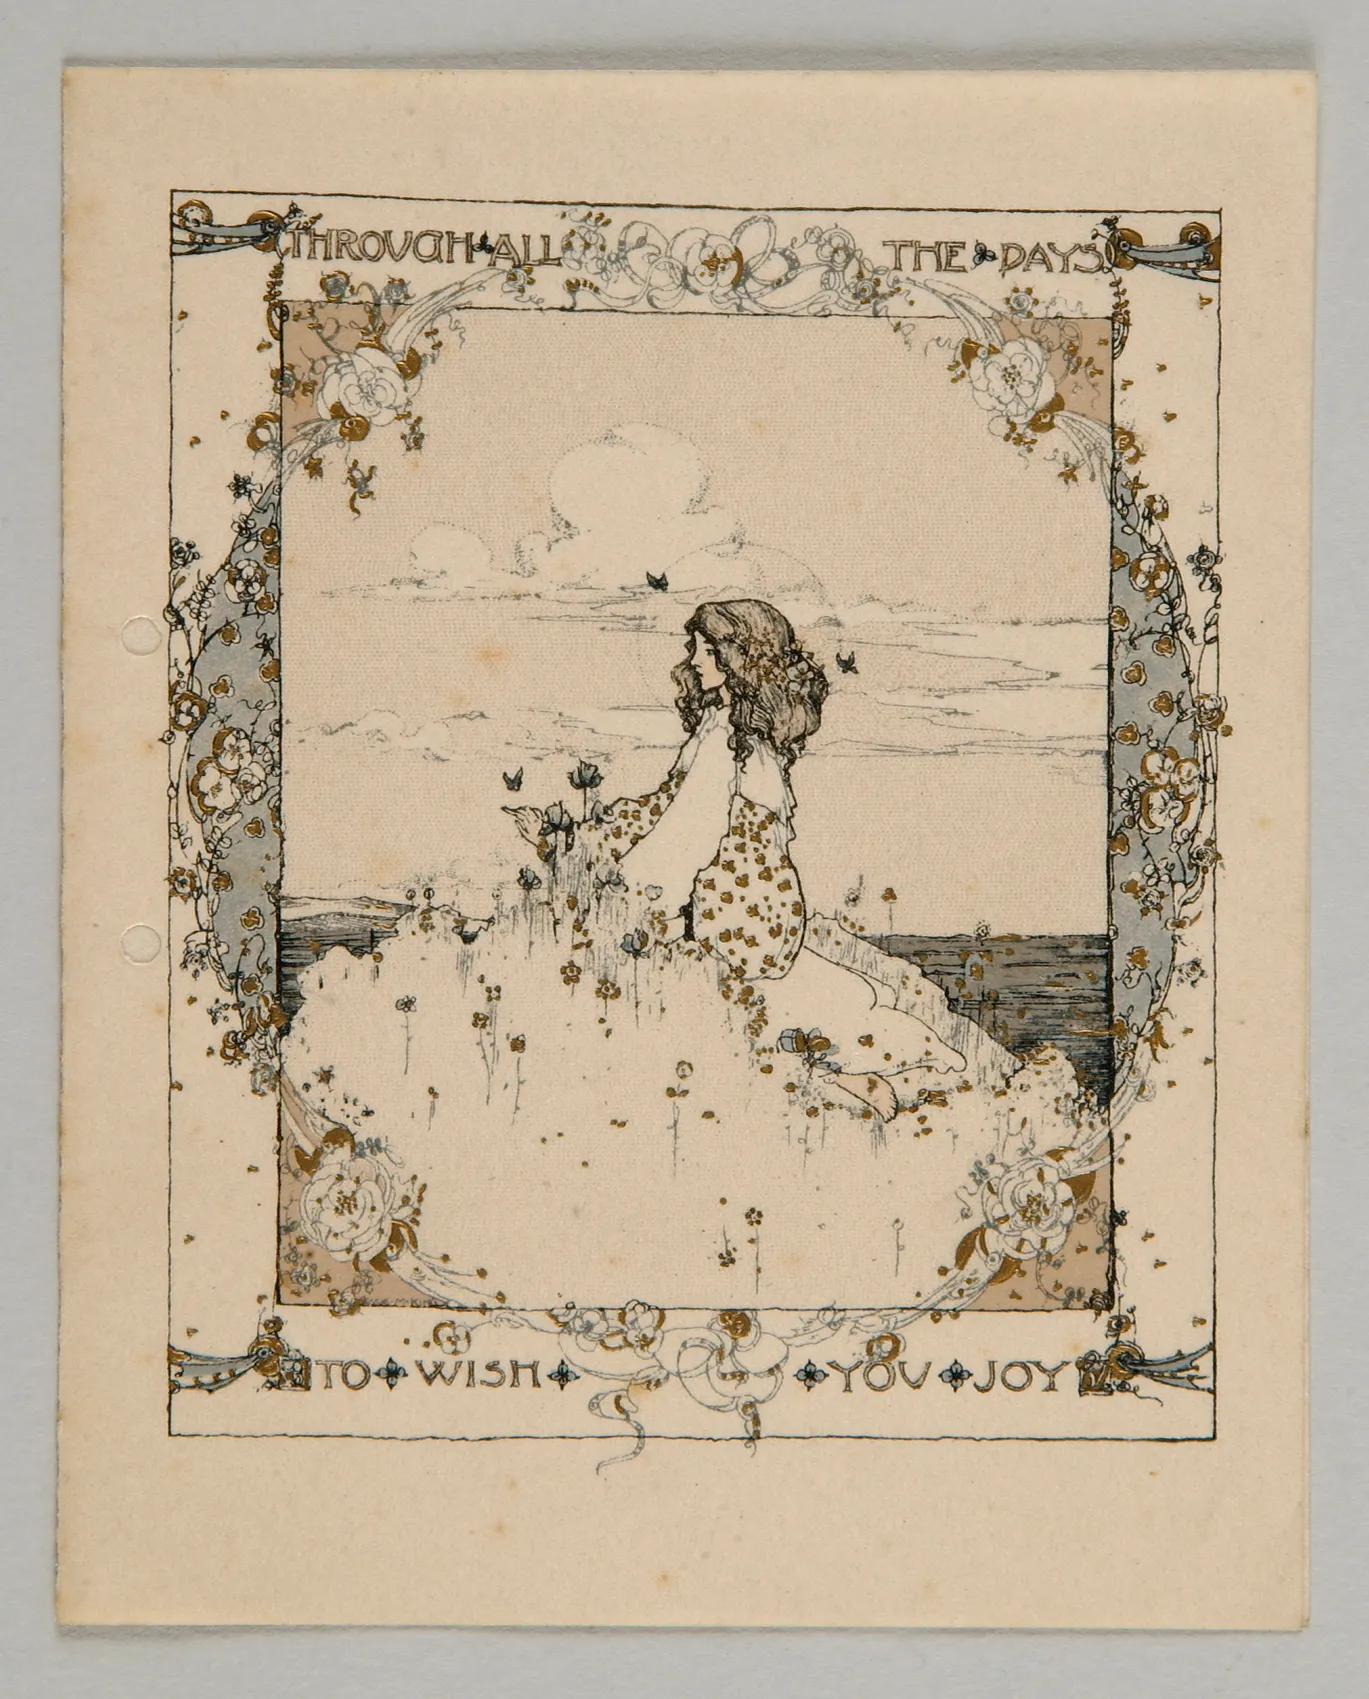 a drawing of figure sitting amongst flowers by the sea on a hilltop.